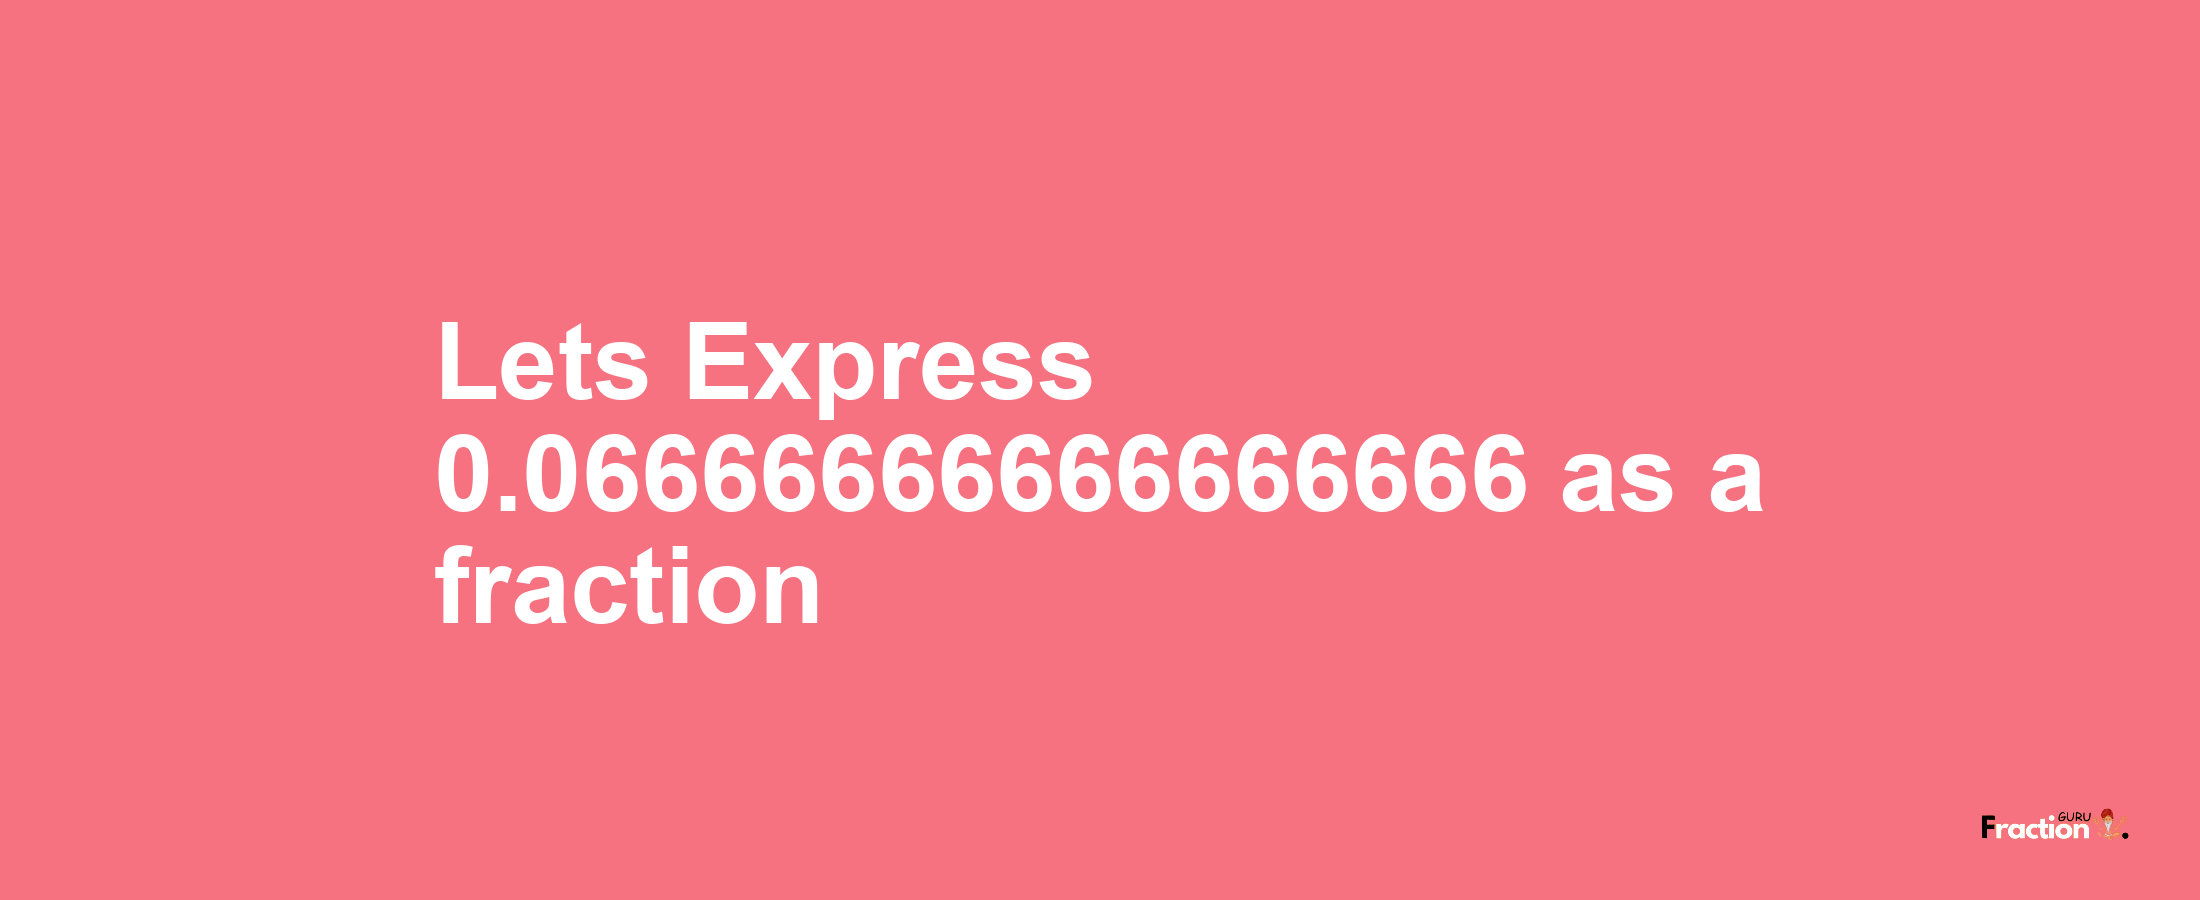 Lets Express 0.06666666666666666 as afraction